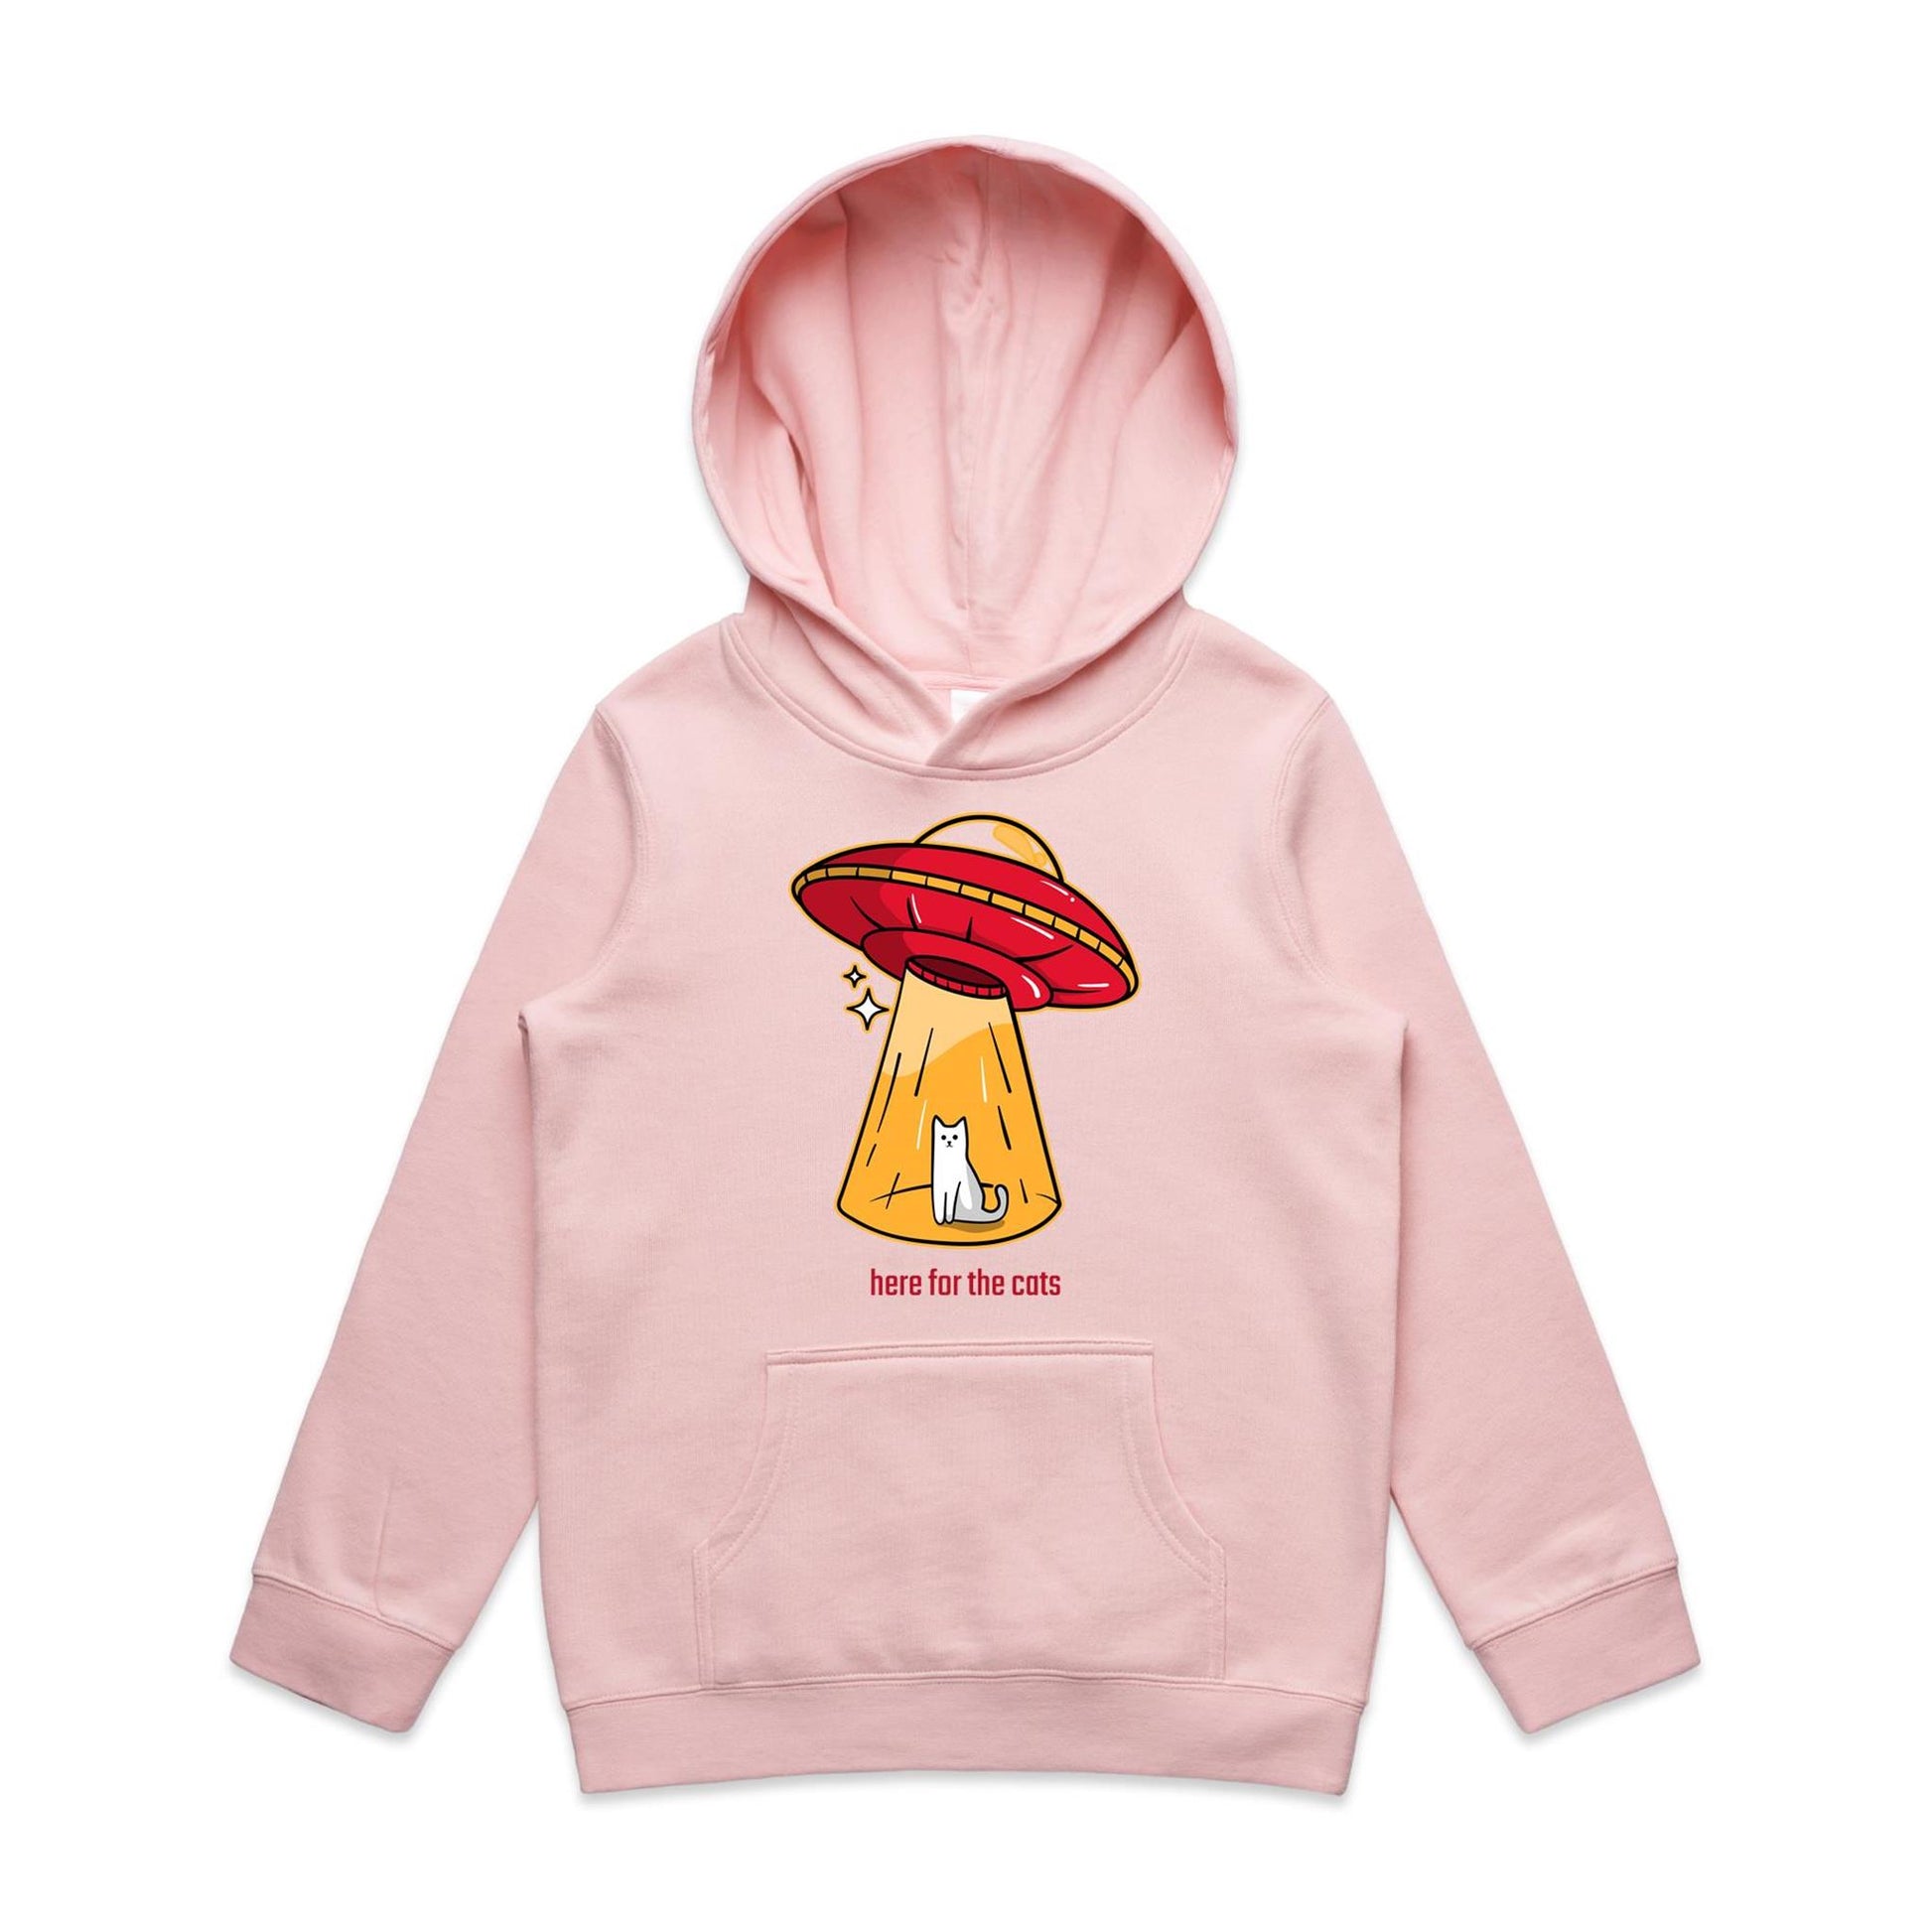 UFO, Here For The Cats - Youth Supply Hood Pink Kids Hoodie